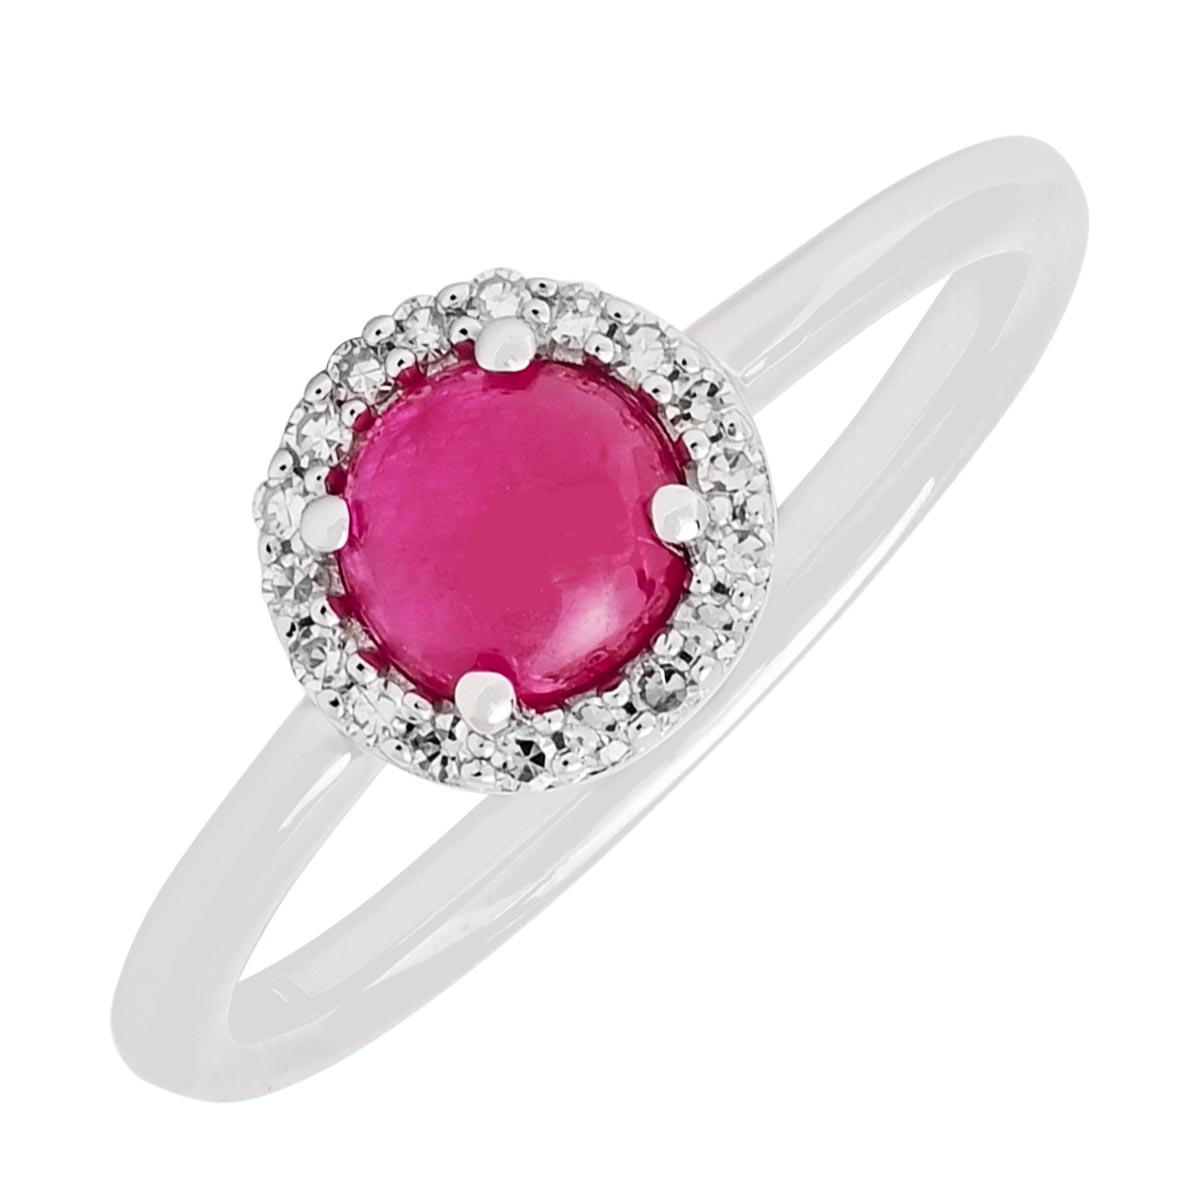 Greenland Ruby Halo Ring in 10kt White Gold with Diamonds (1/10ct tw)